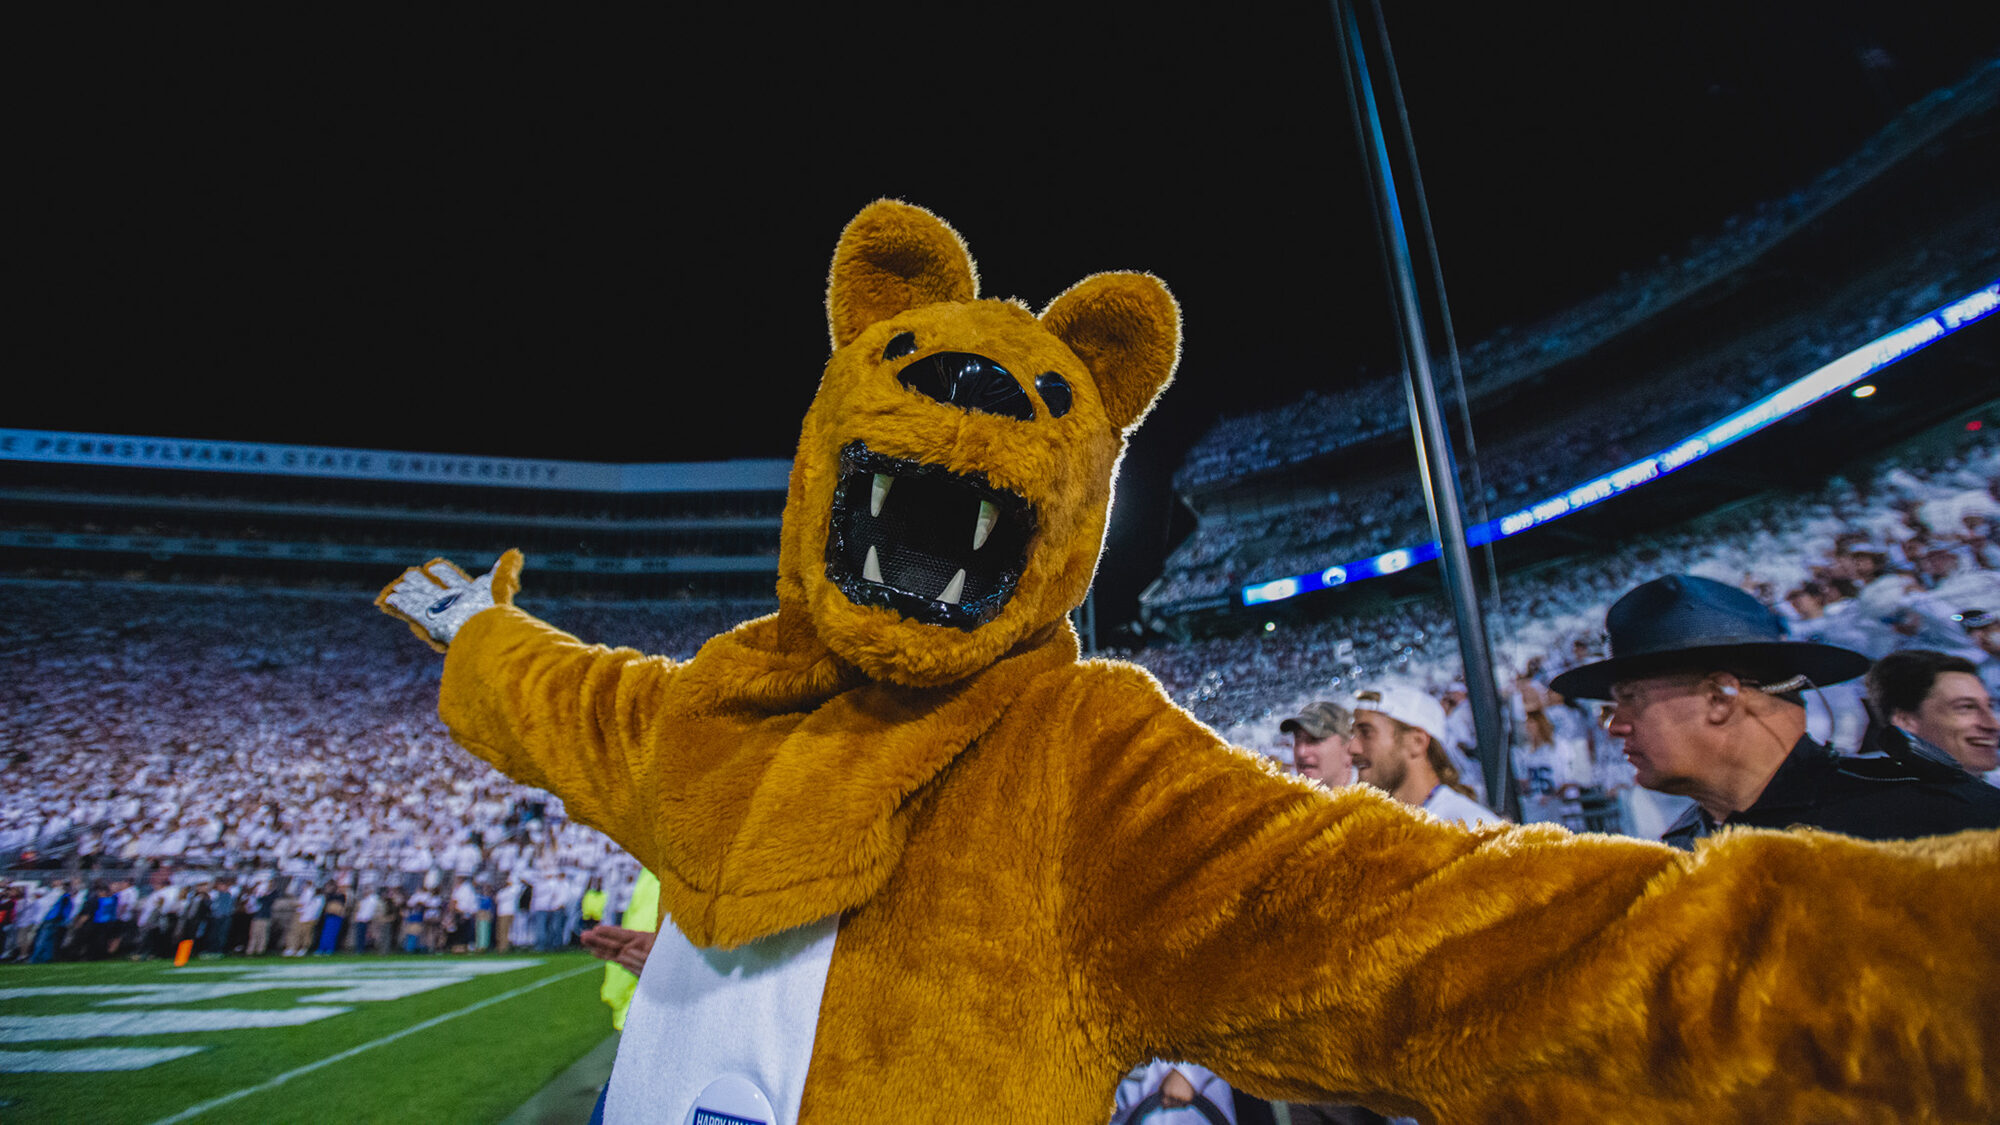 Nittany Lion Taking a Selfie at a Penn State Game